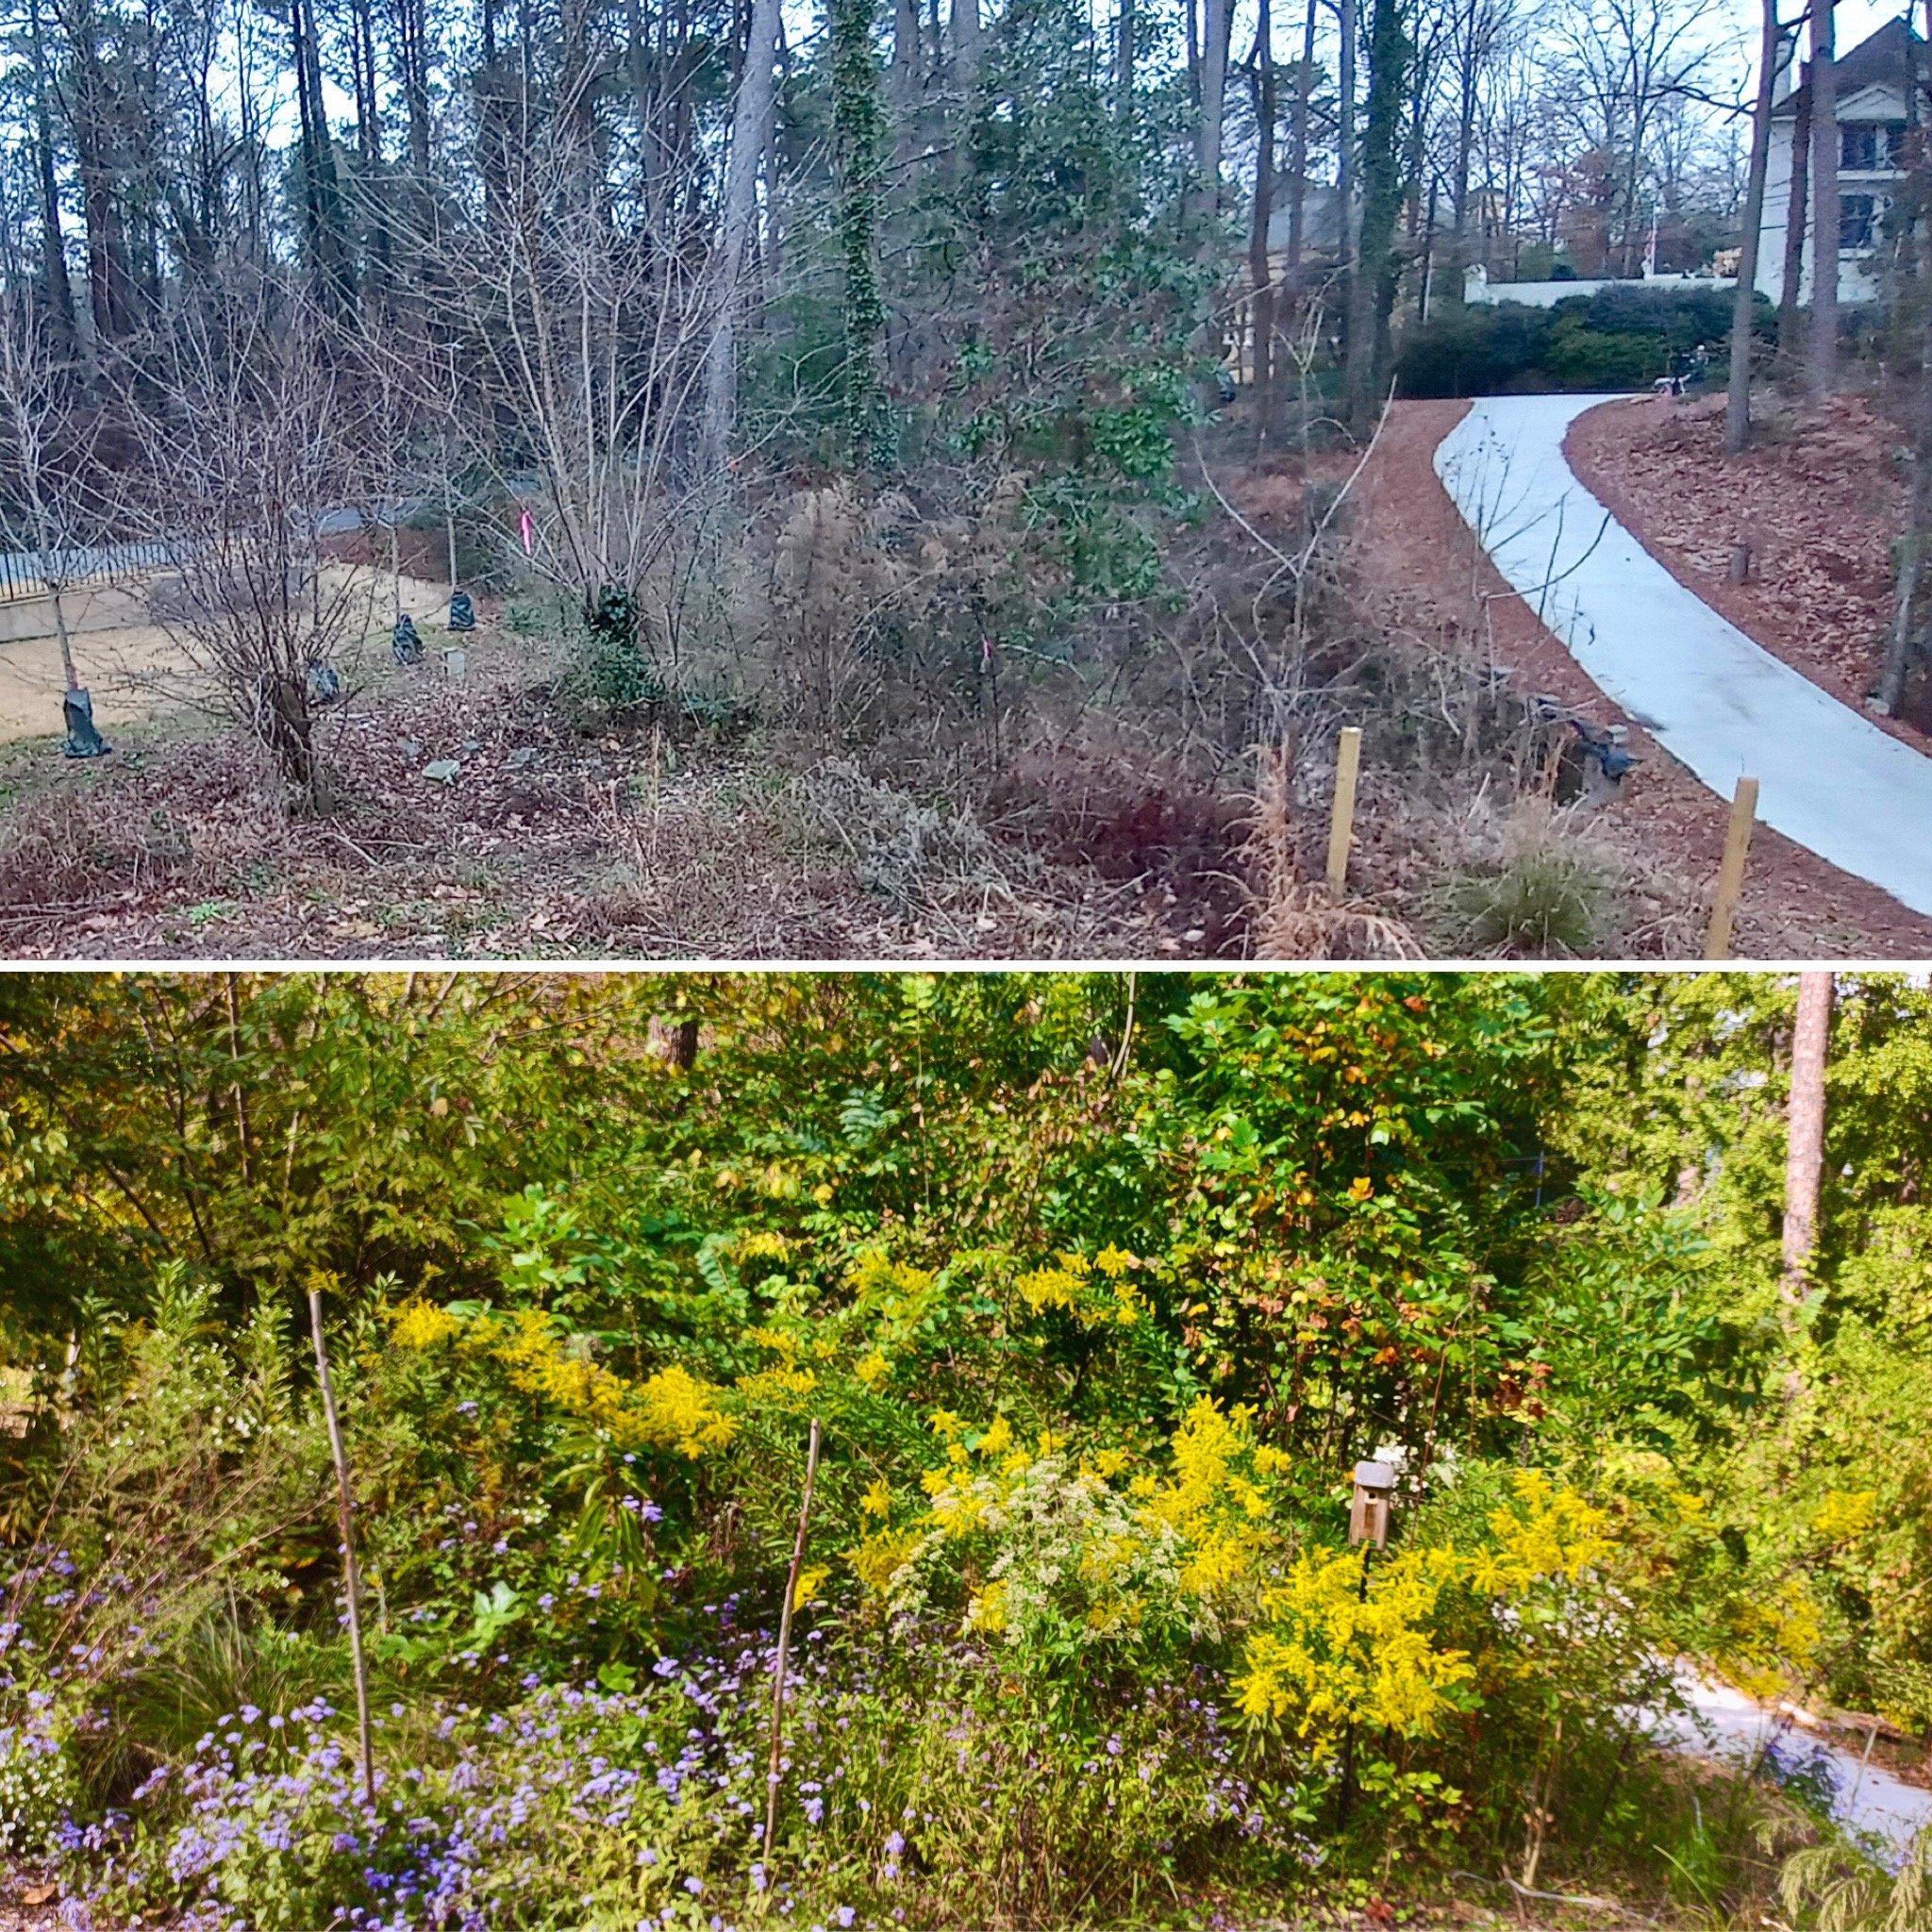  After 2 years of invasive control and 2 applications of native seed, native plant communities have established and the area shows a dramatic improvement in biodiversity. 